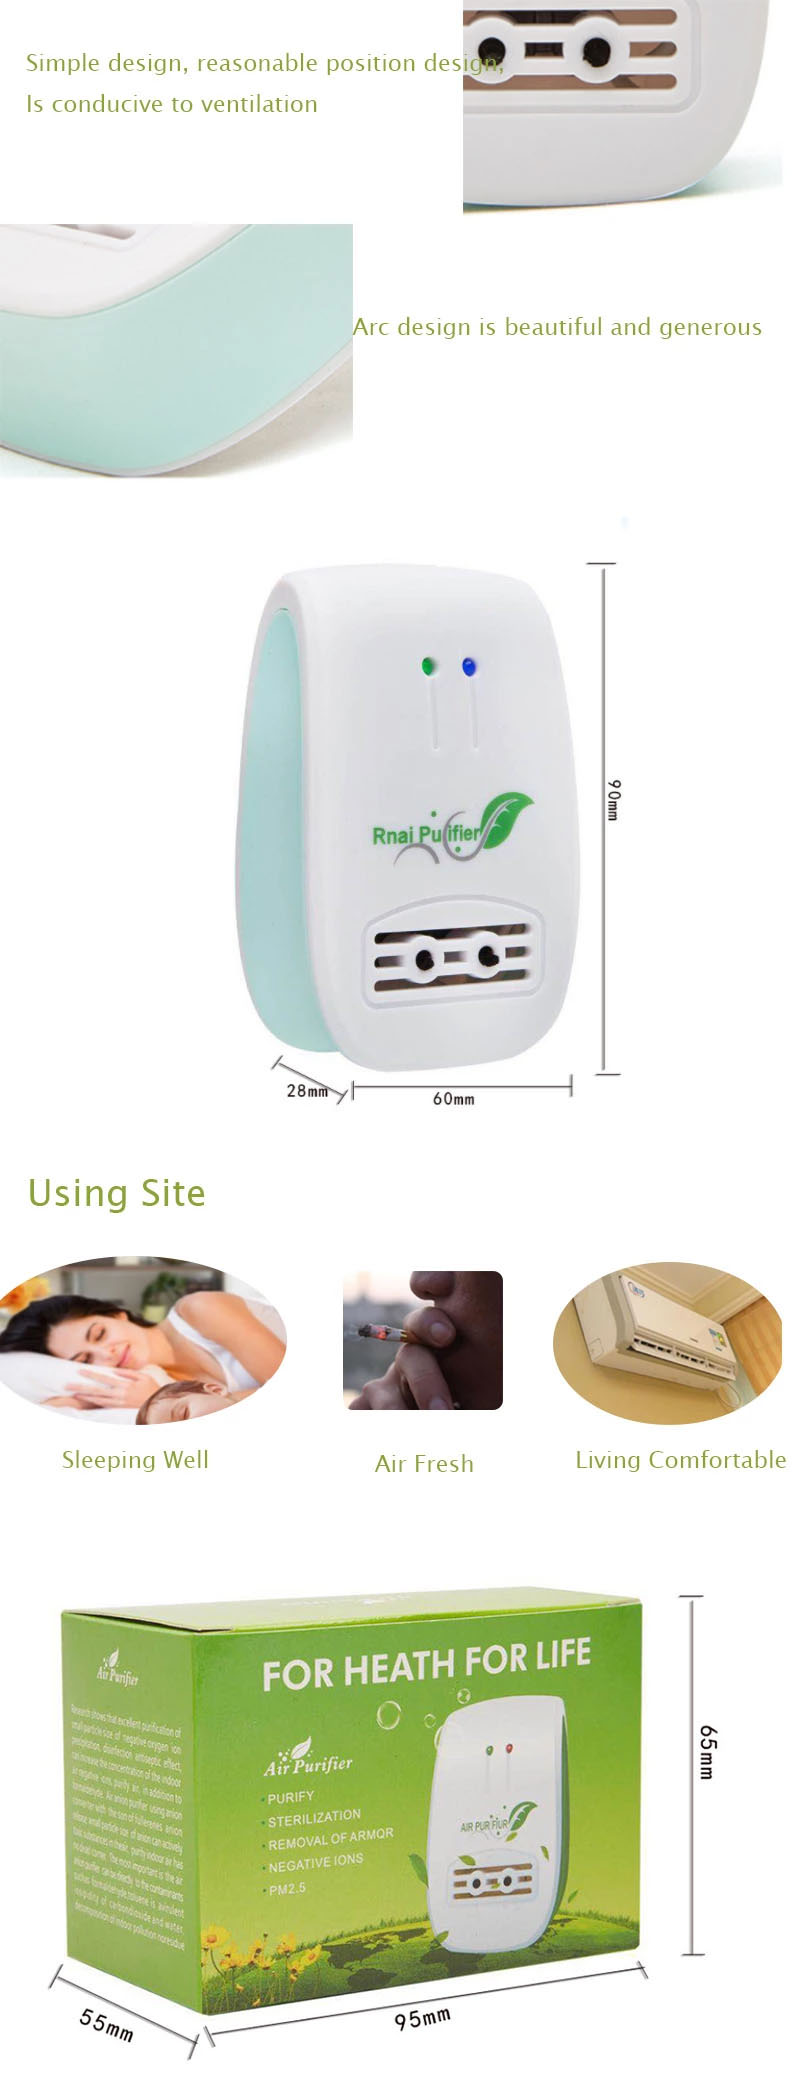 Air Cleaner Revitalizer Portable Home Air Purifier Anion Ozone Air Purifier With Filter for Office Hospital3